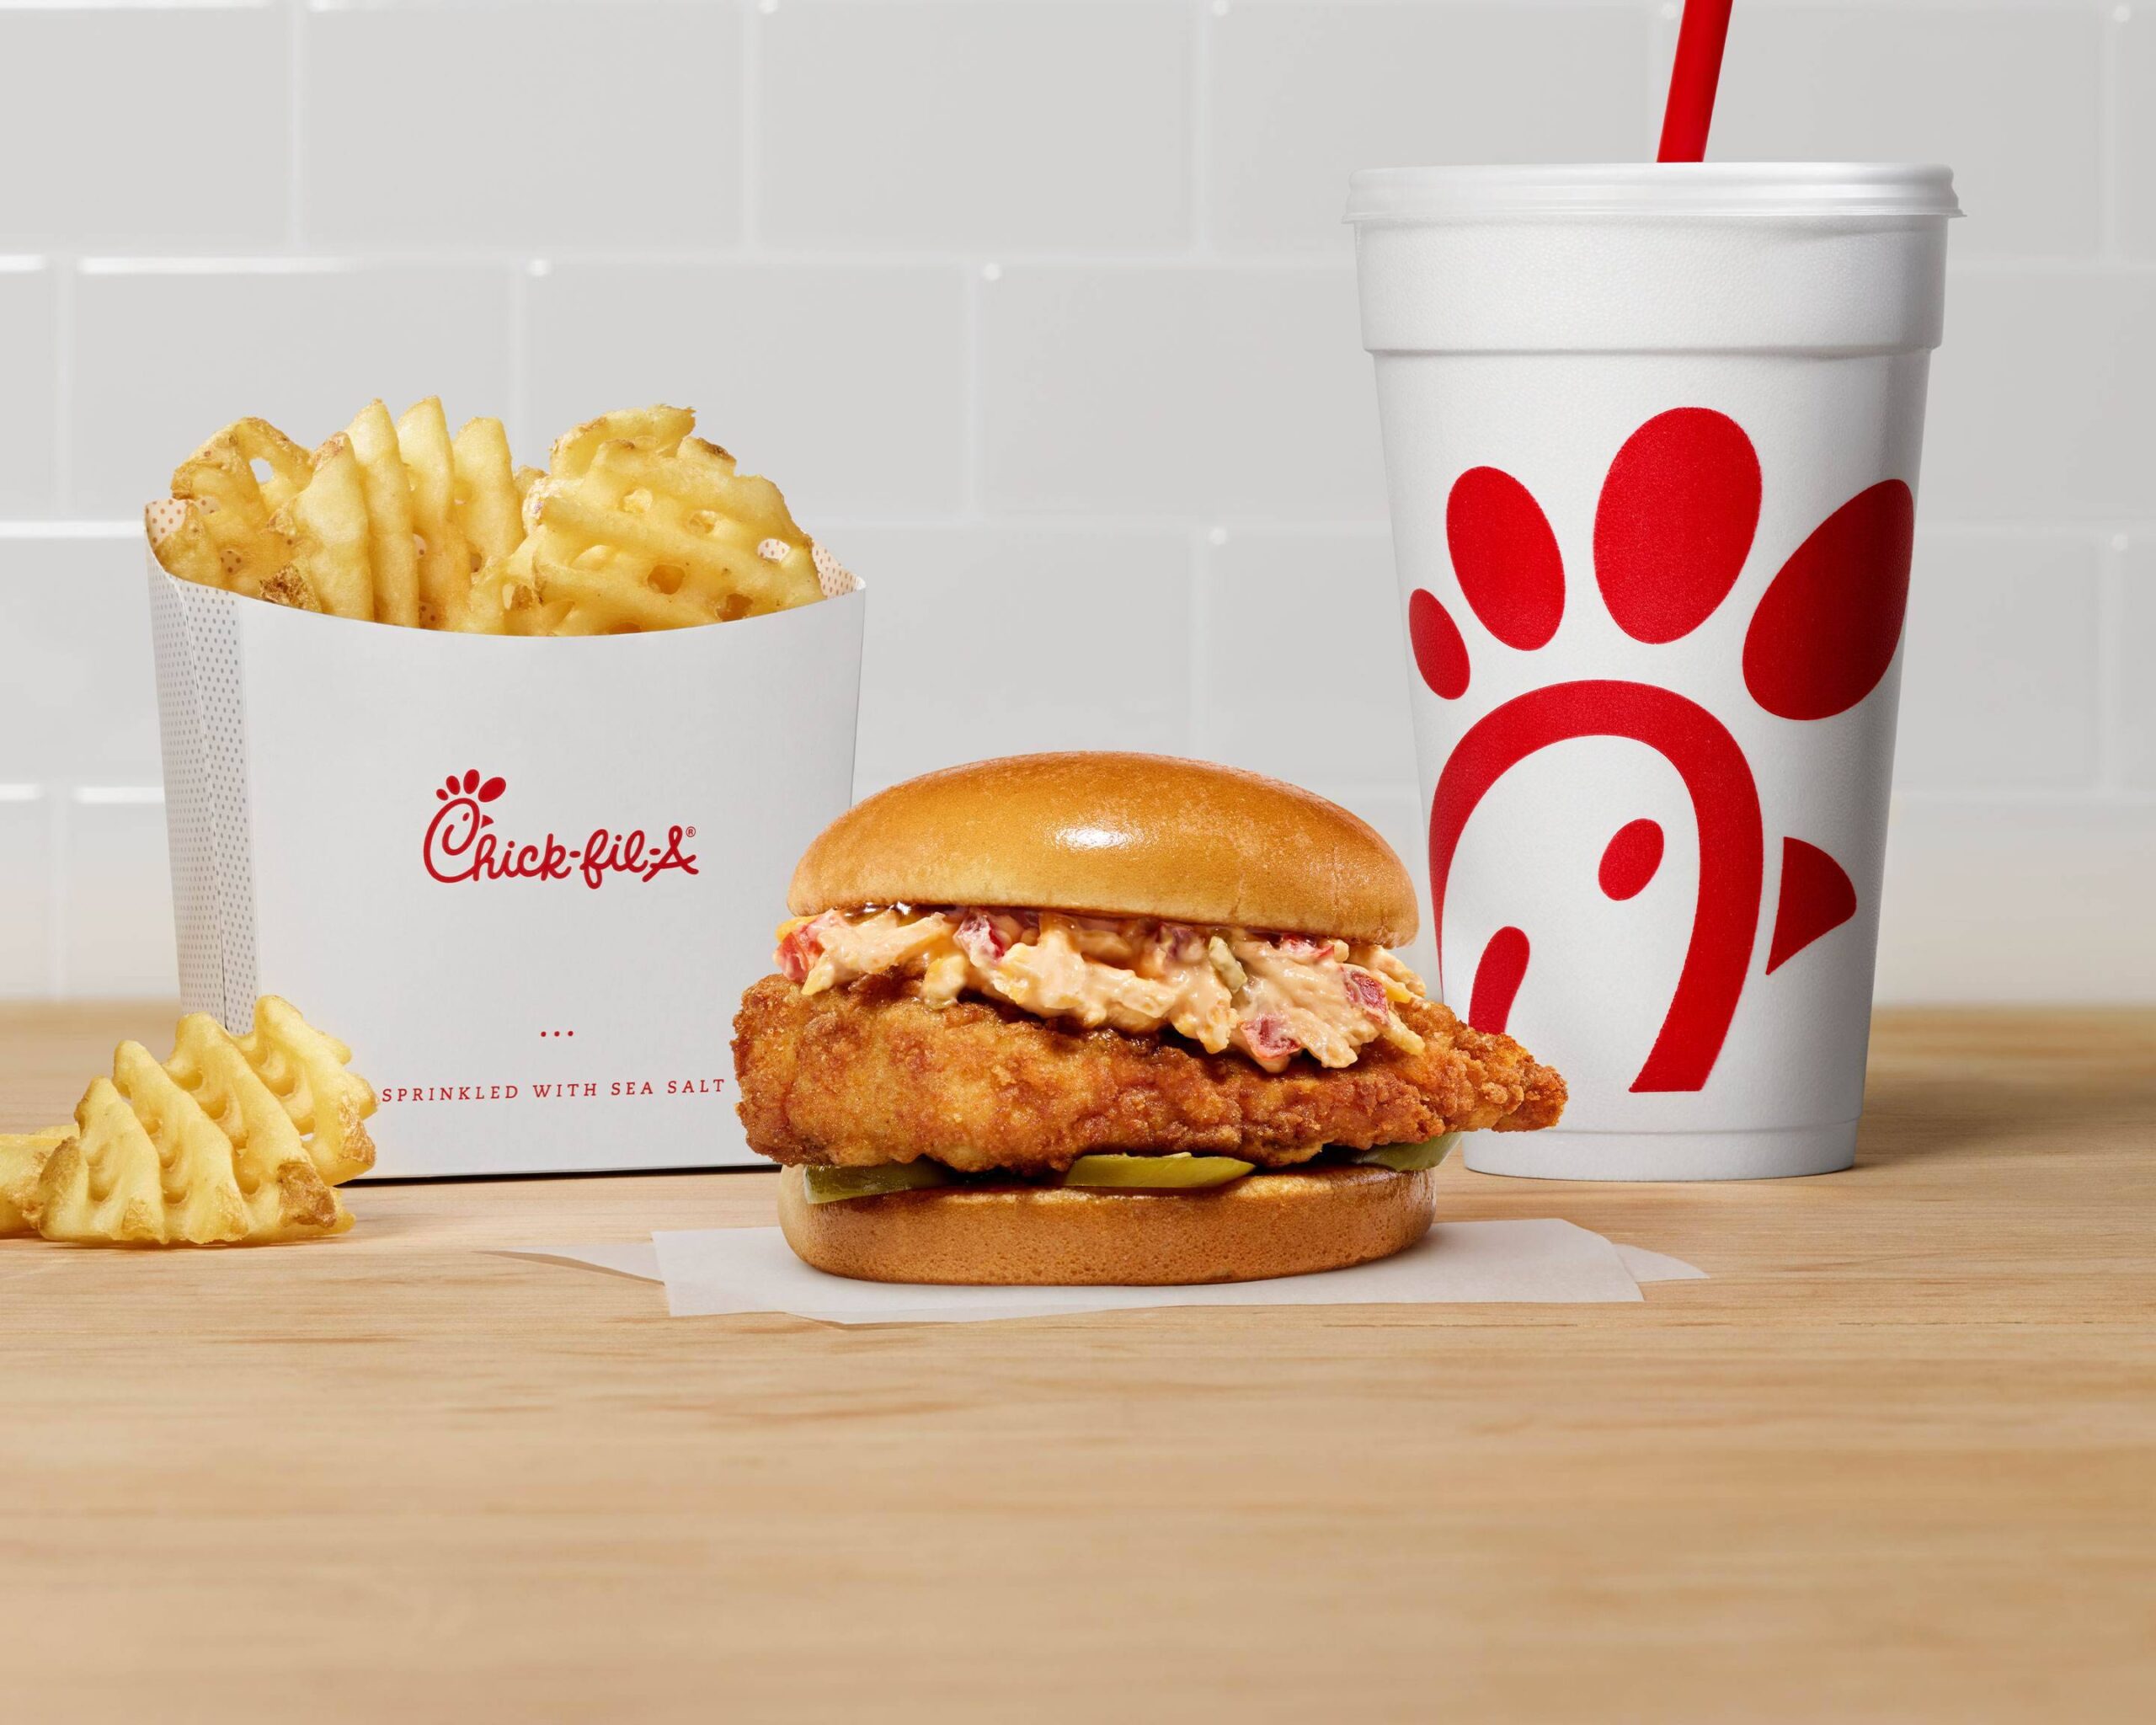 A Delectable Journey Through the Chick fil A Menu